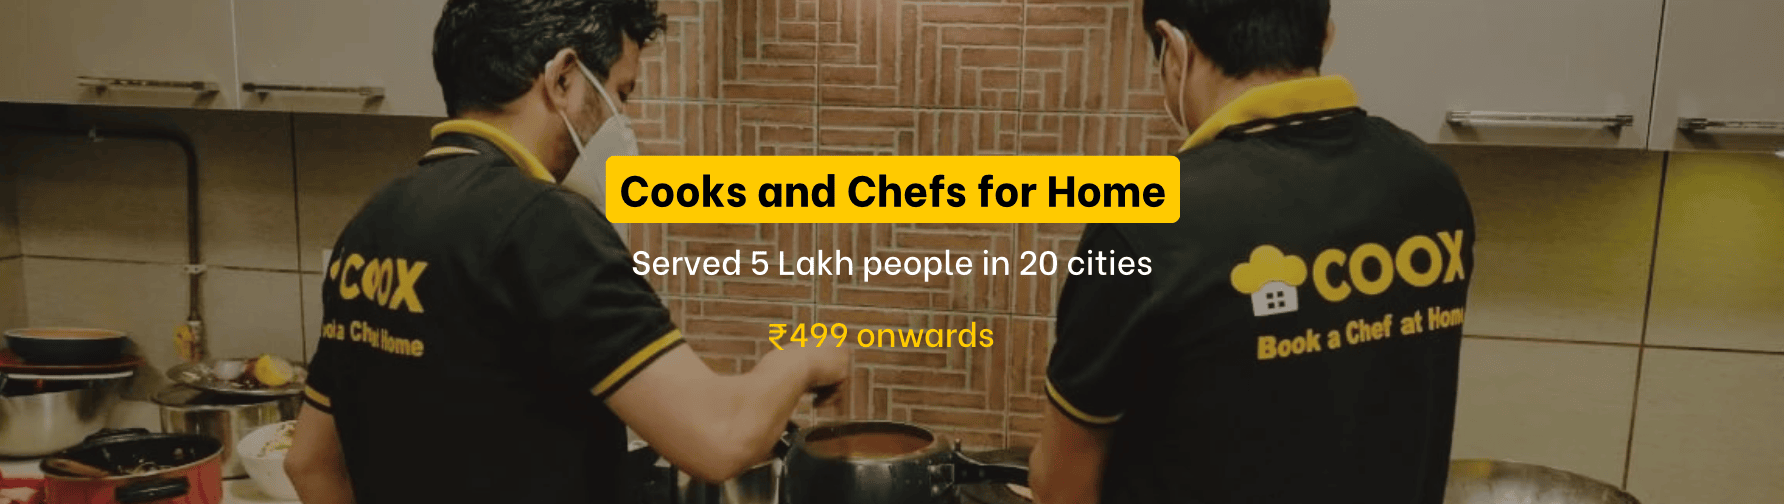 Cooks and Chefs at Home